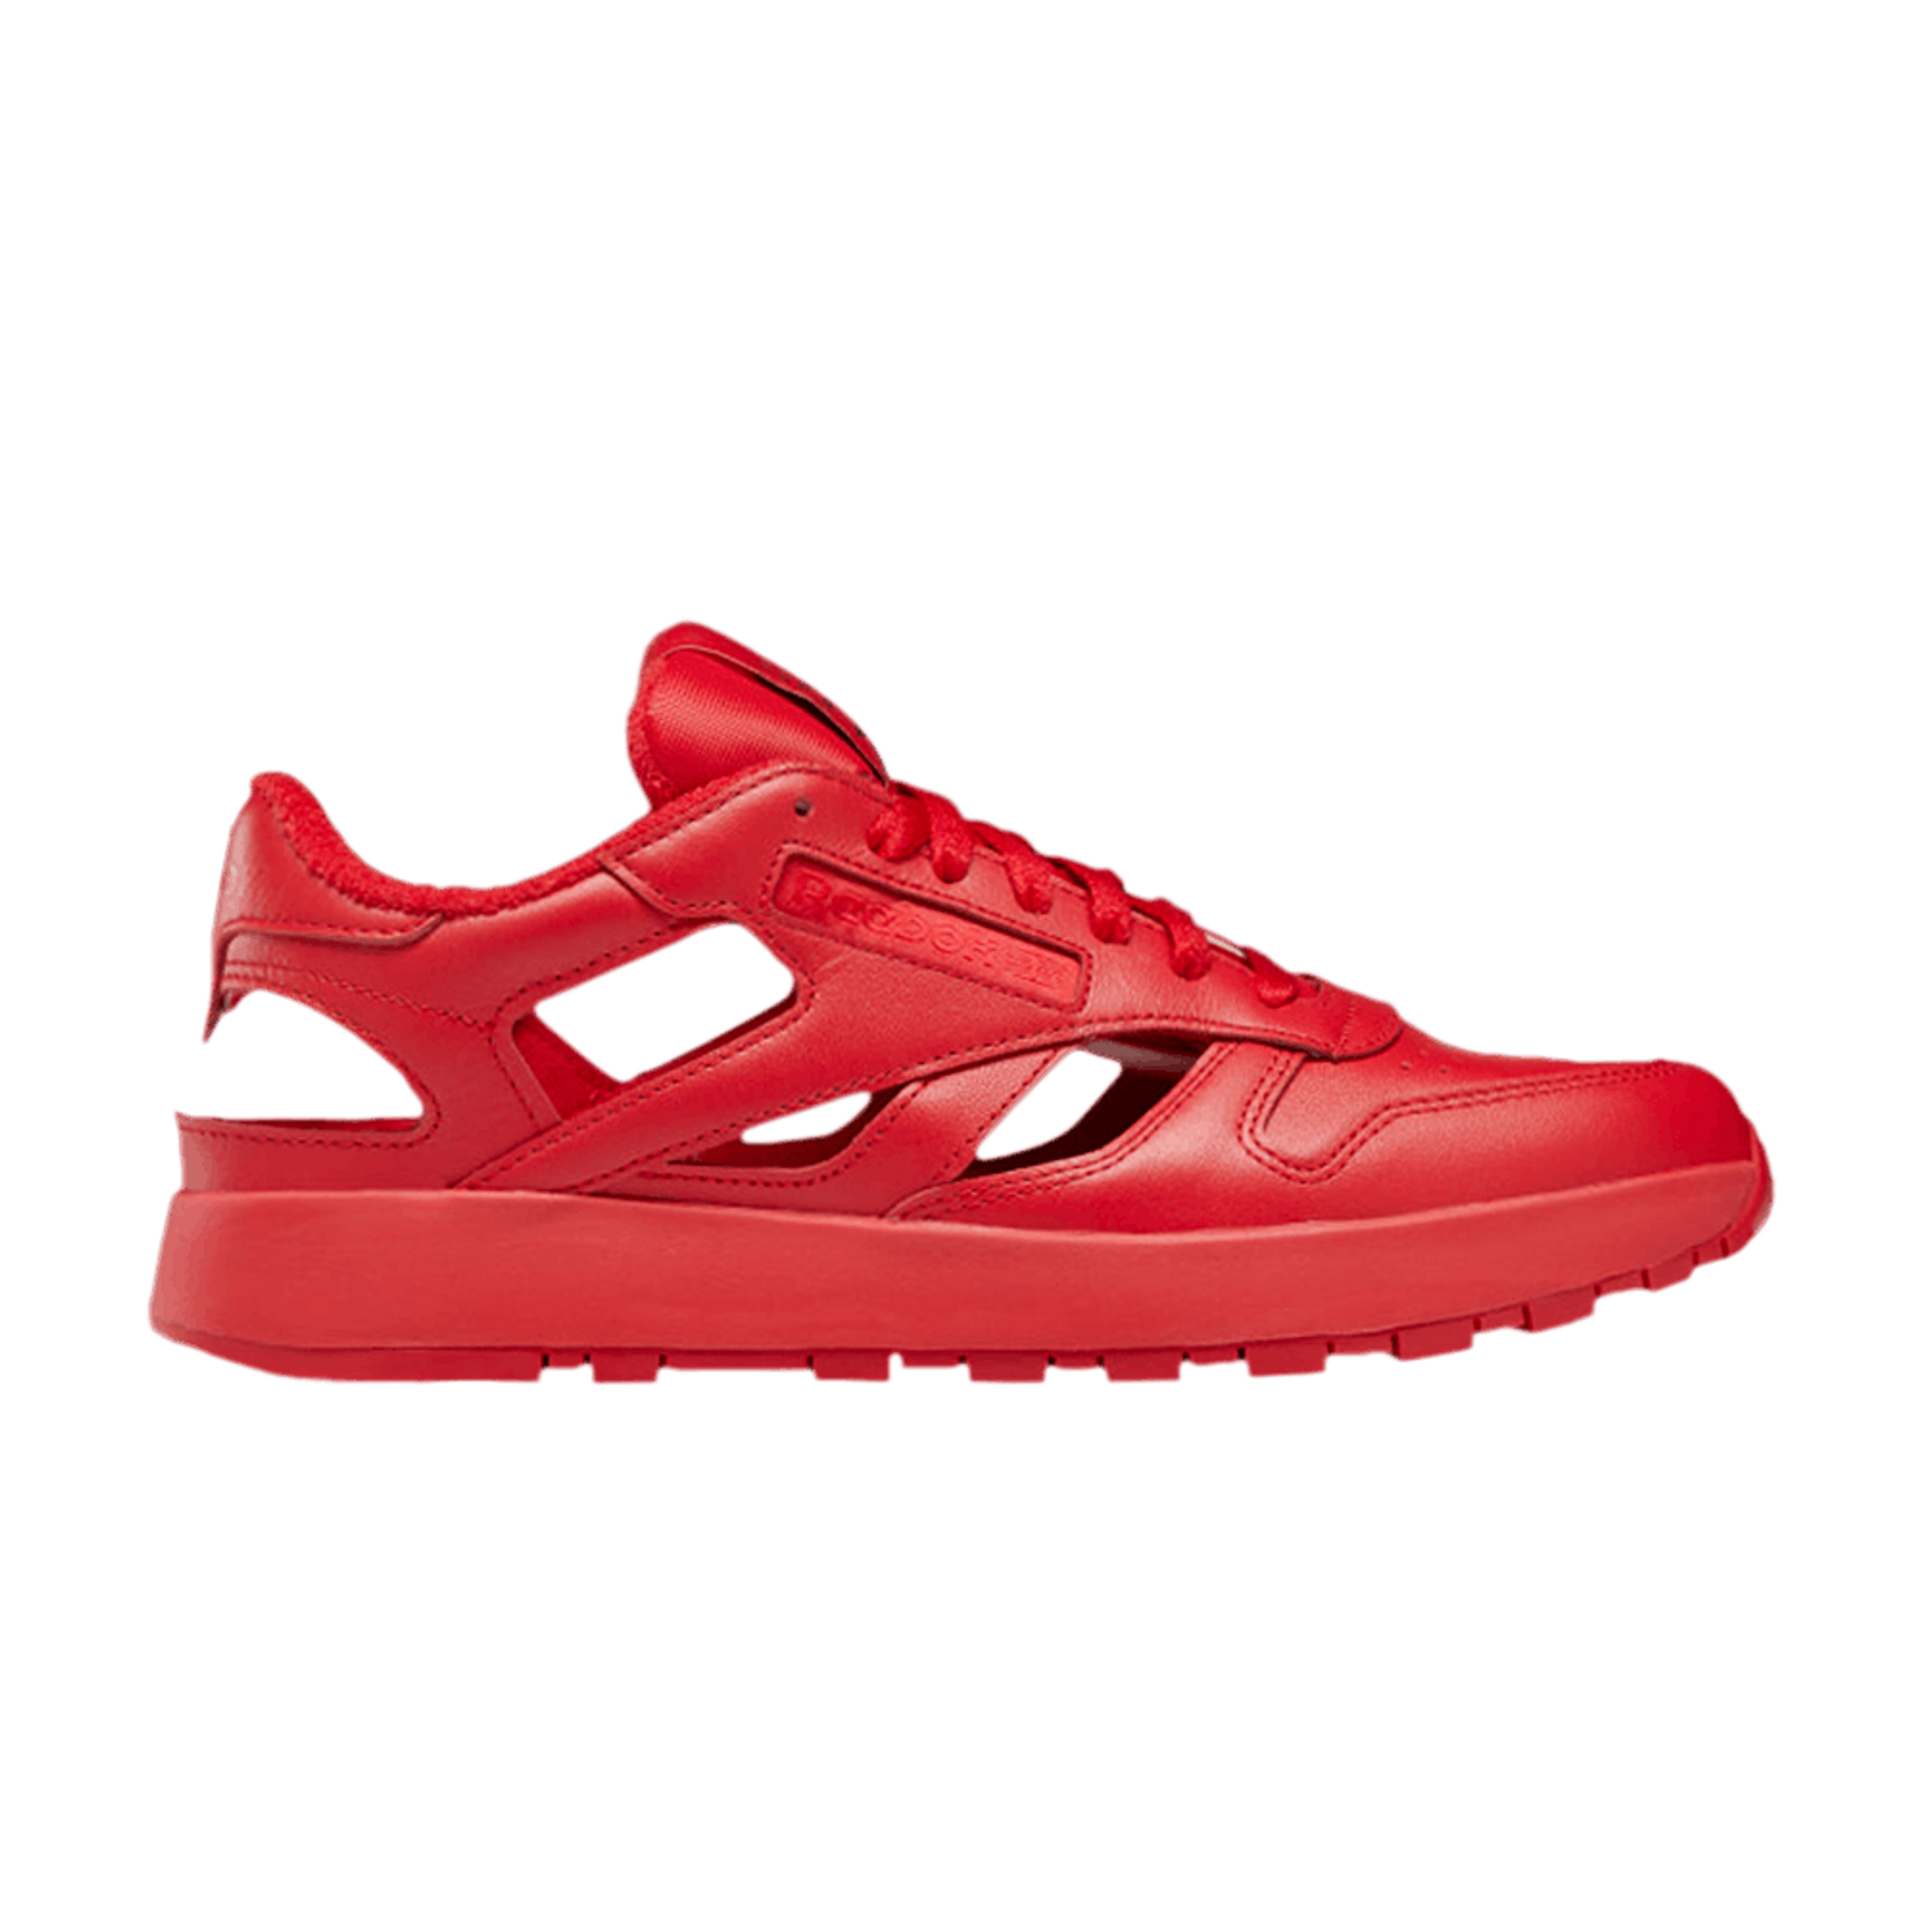 Reebok Maison Margiela x Classic Leather DQ 'Vector Red'